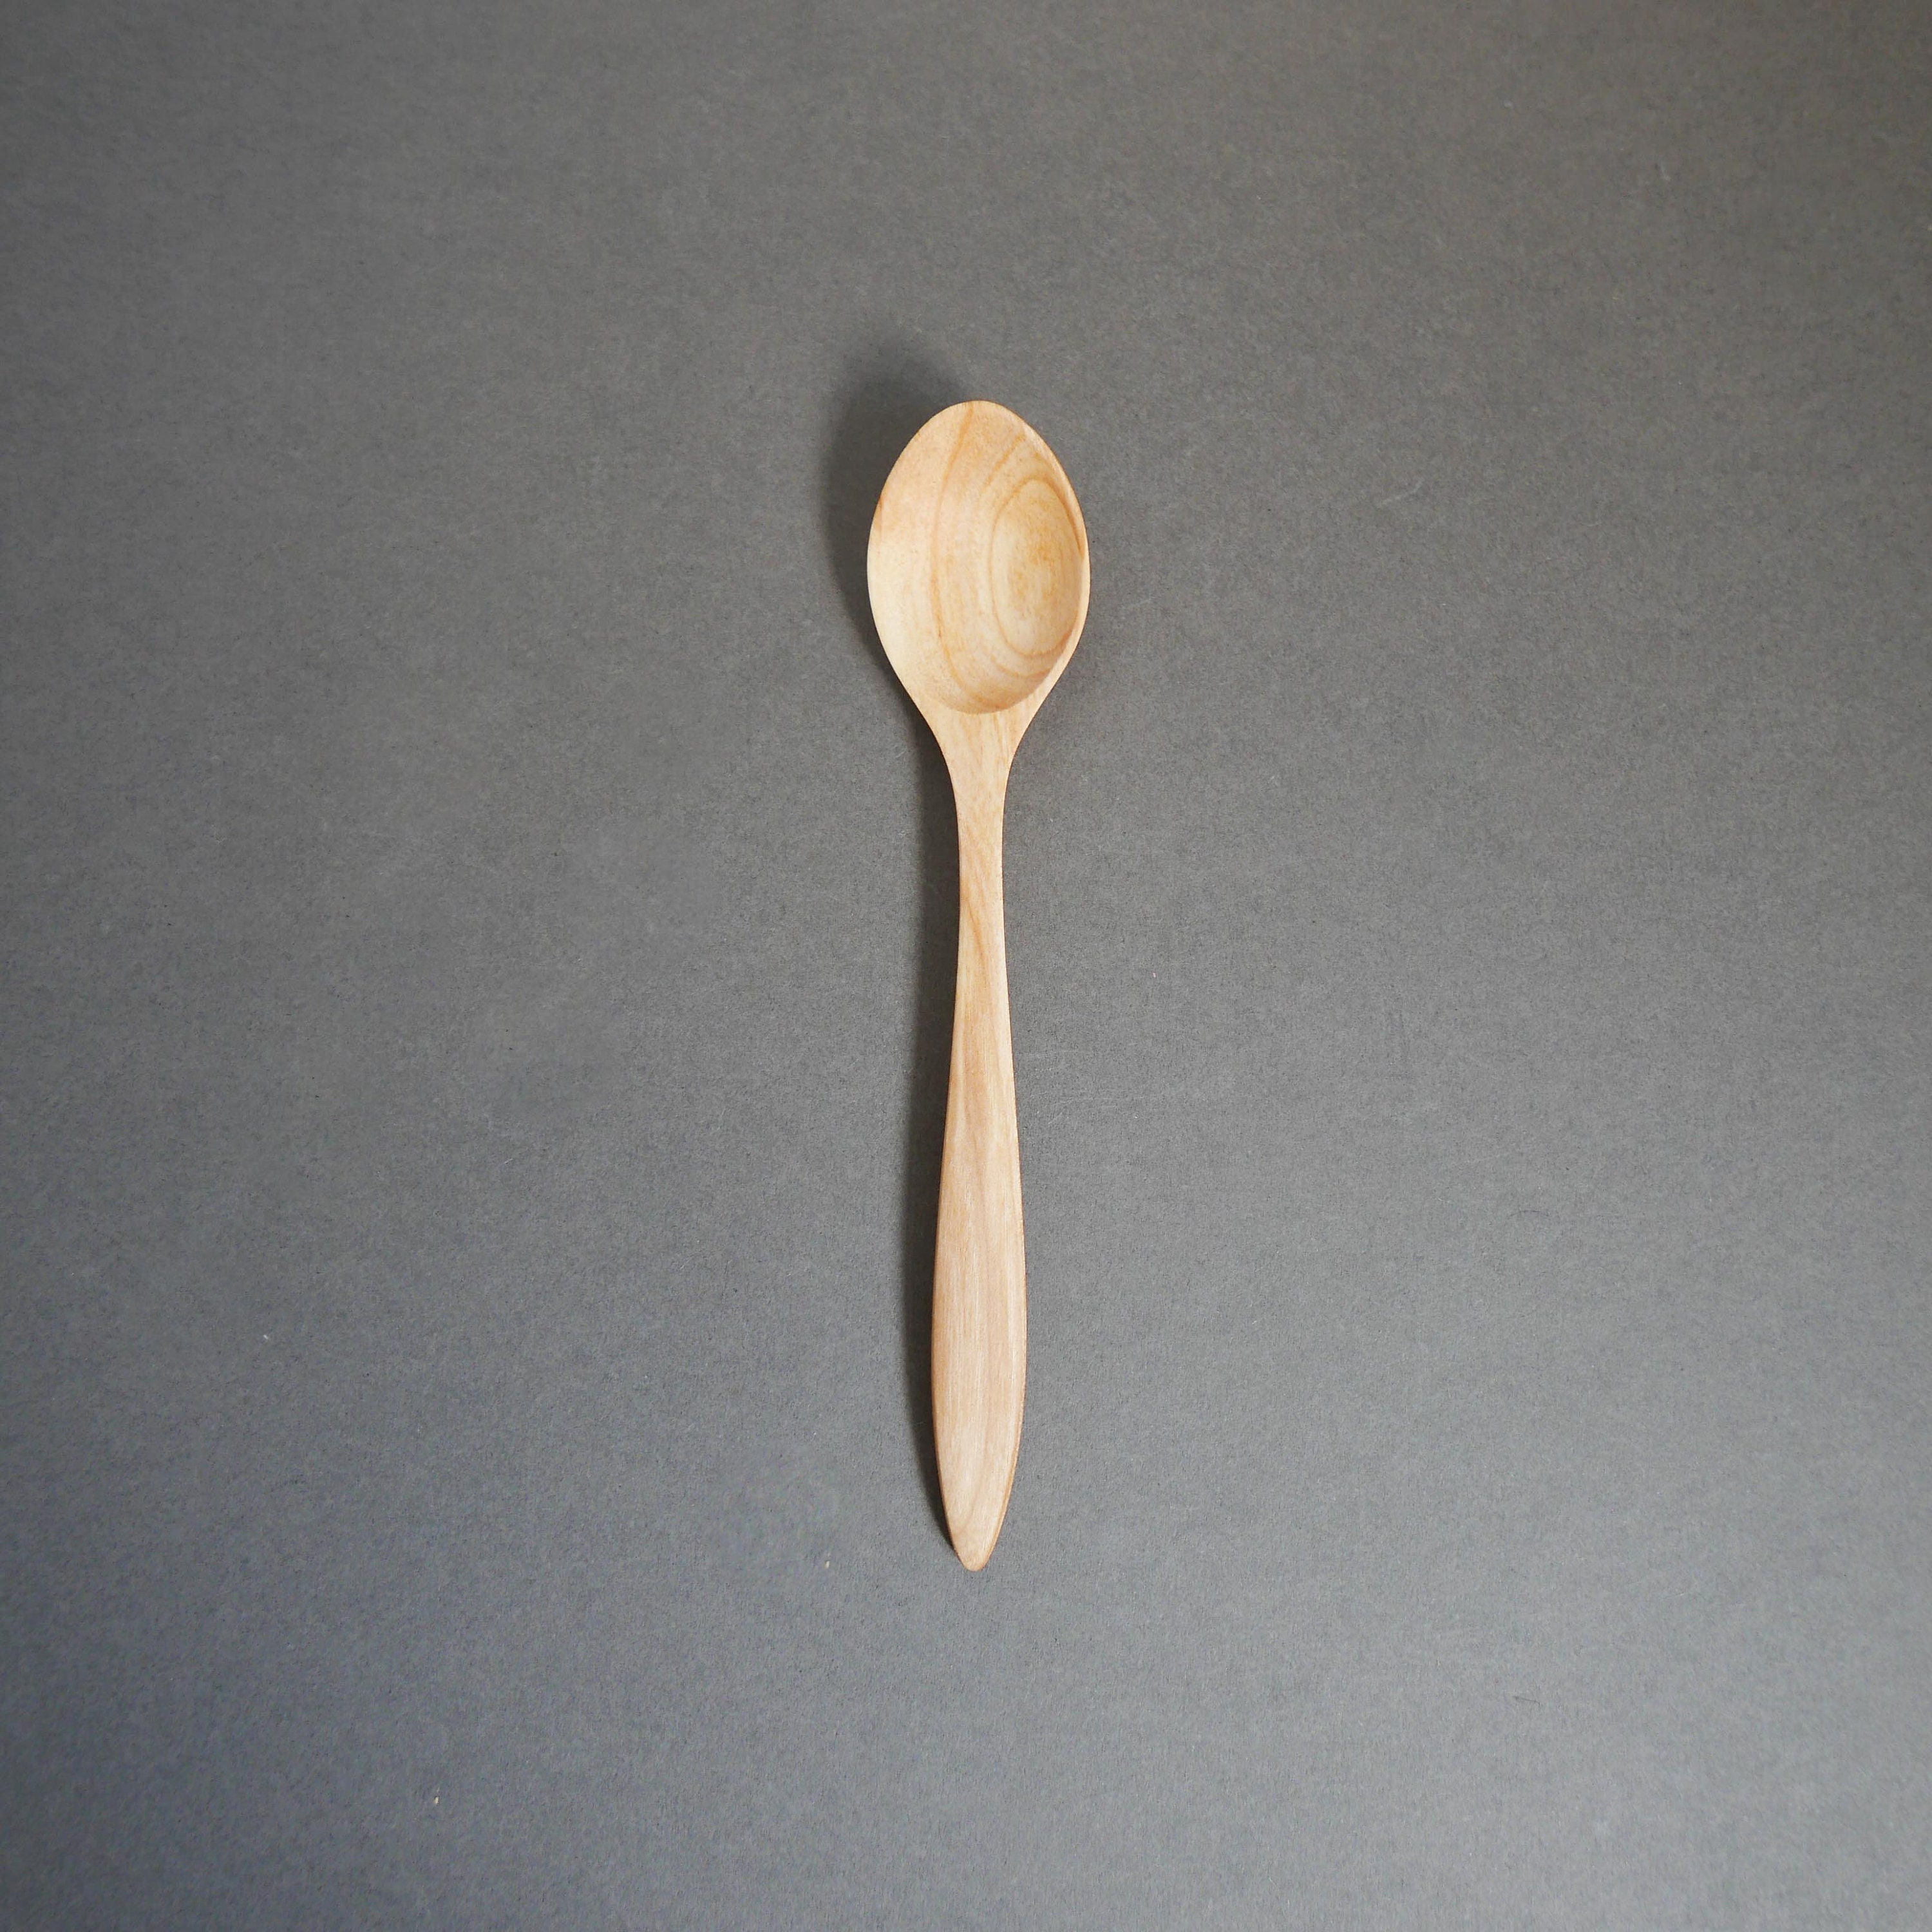 Rodipu Multifunction Wooden Wood Coffee Scoops Spoons For Kitchen Baking Utensil Long handle 